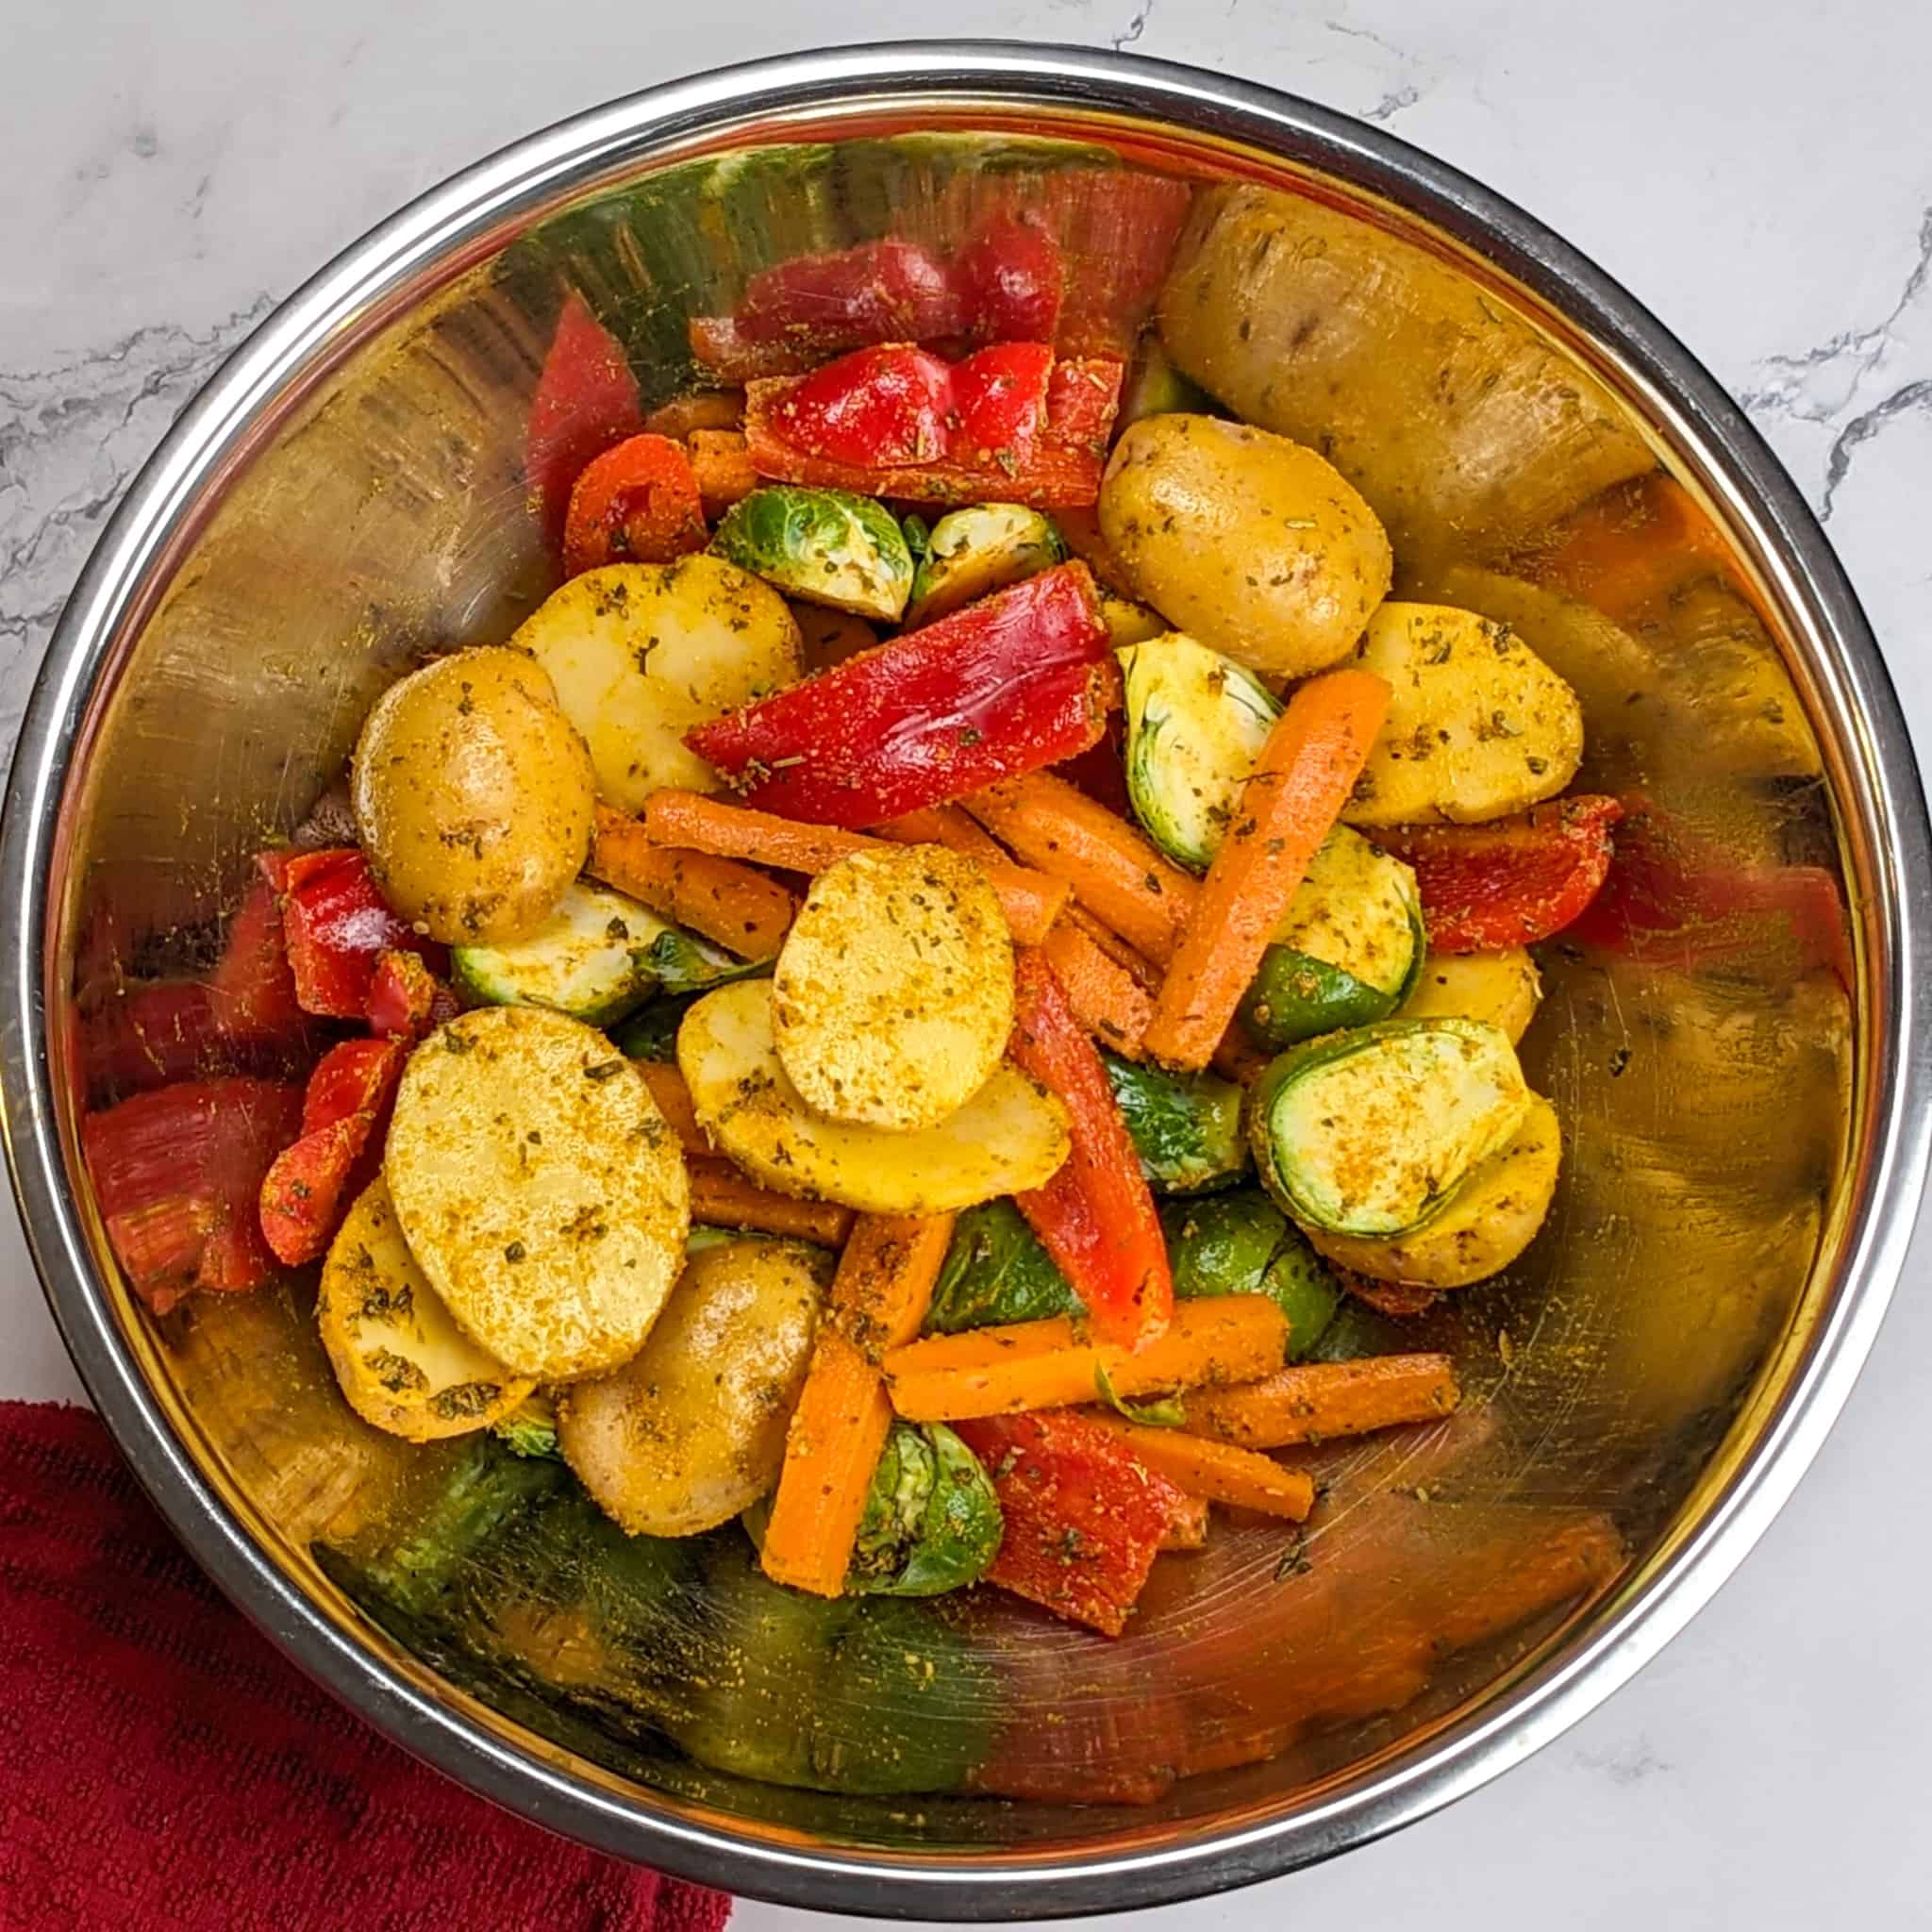 seasoned vegetables in a large mixing bowl for the Calabrian Pepper & Lemon Yogurt Baked Chicken and Vegetables recipe